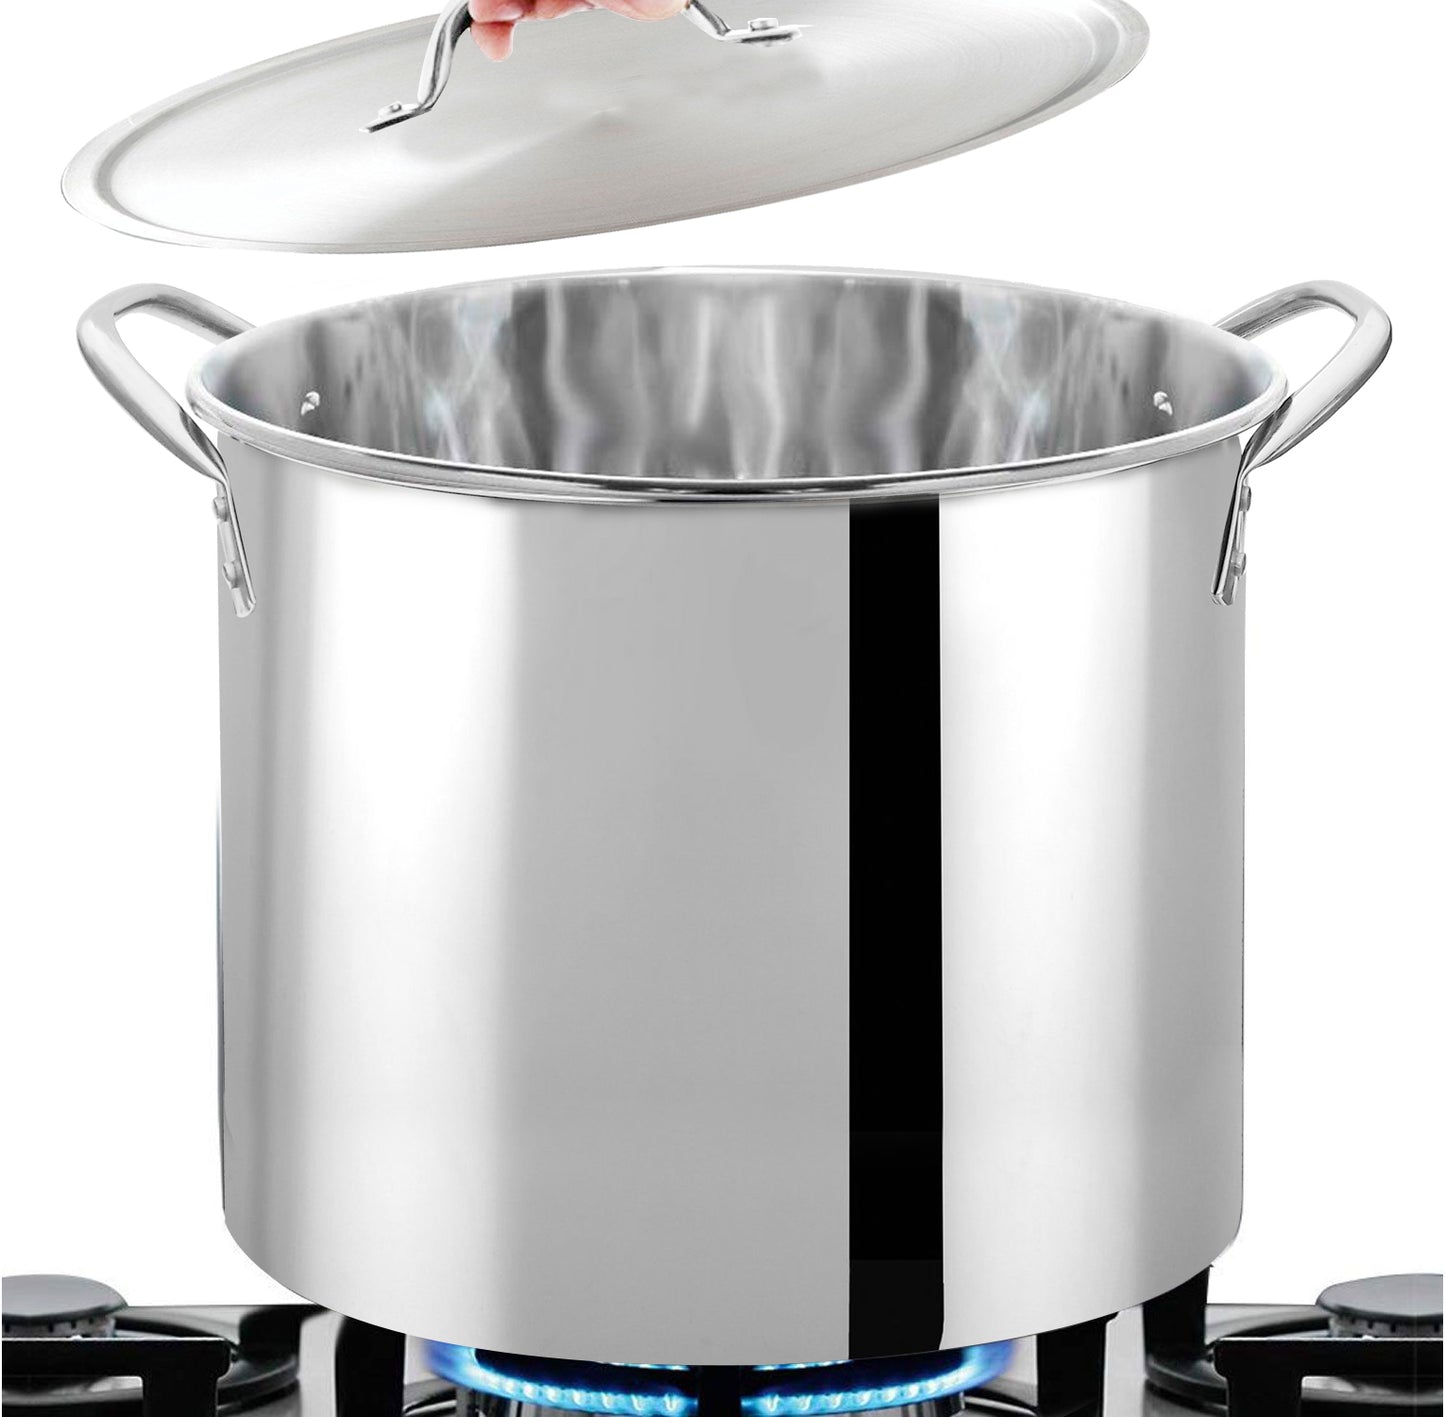 Food Grade Stainless Steel Heavy Duty Induction - Large Stock Pot, Stew Pot,  Simmering Pot, Soup Pot with See Through Lid, Dishwasher Safe - China  Stainless Steel Casserole and Stainless Steel Cookware